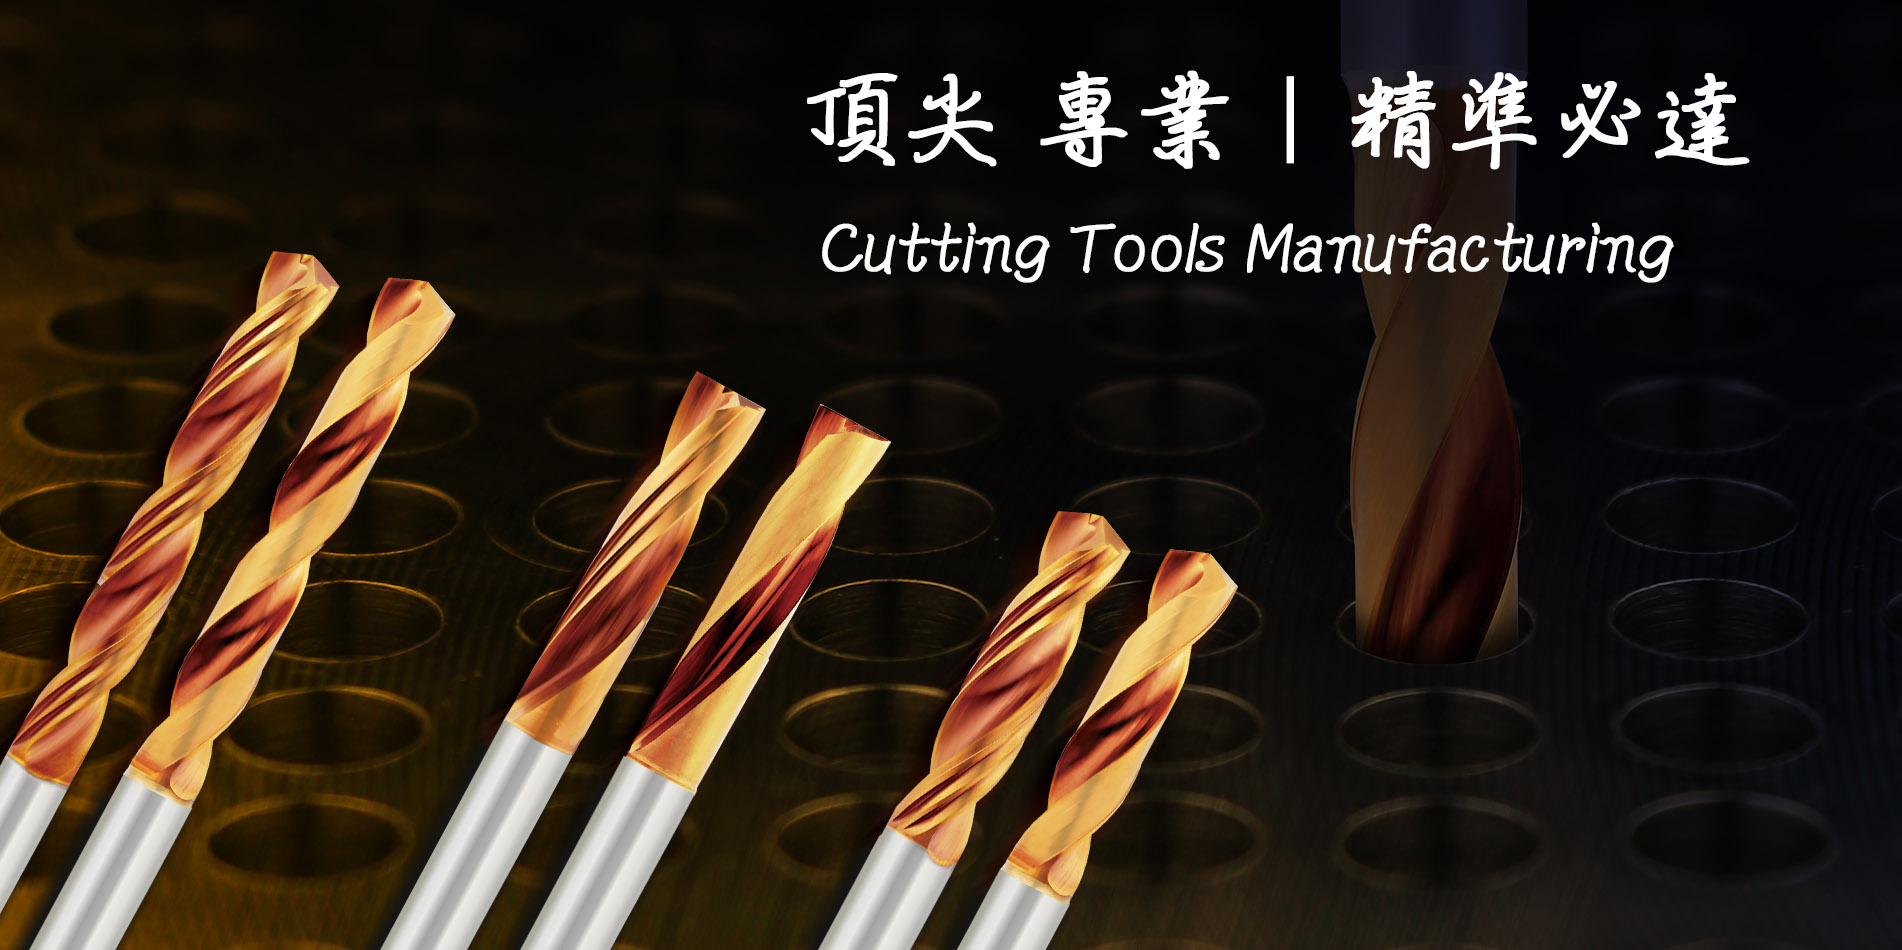 Cutting Tools Manufacturing